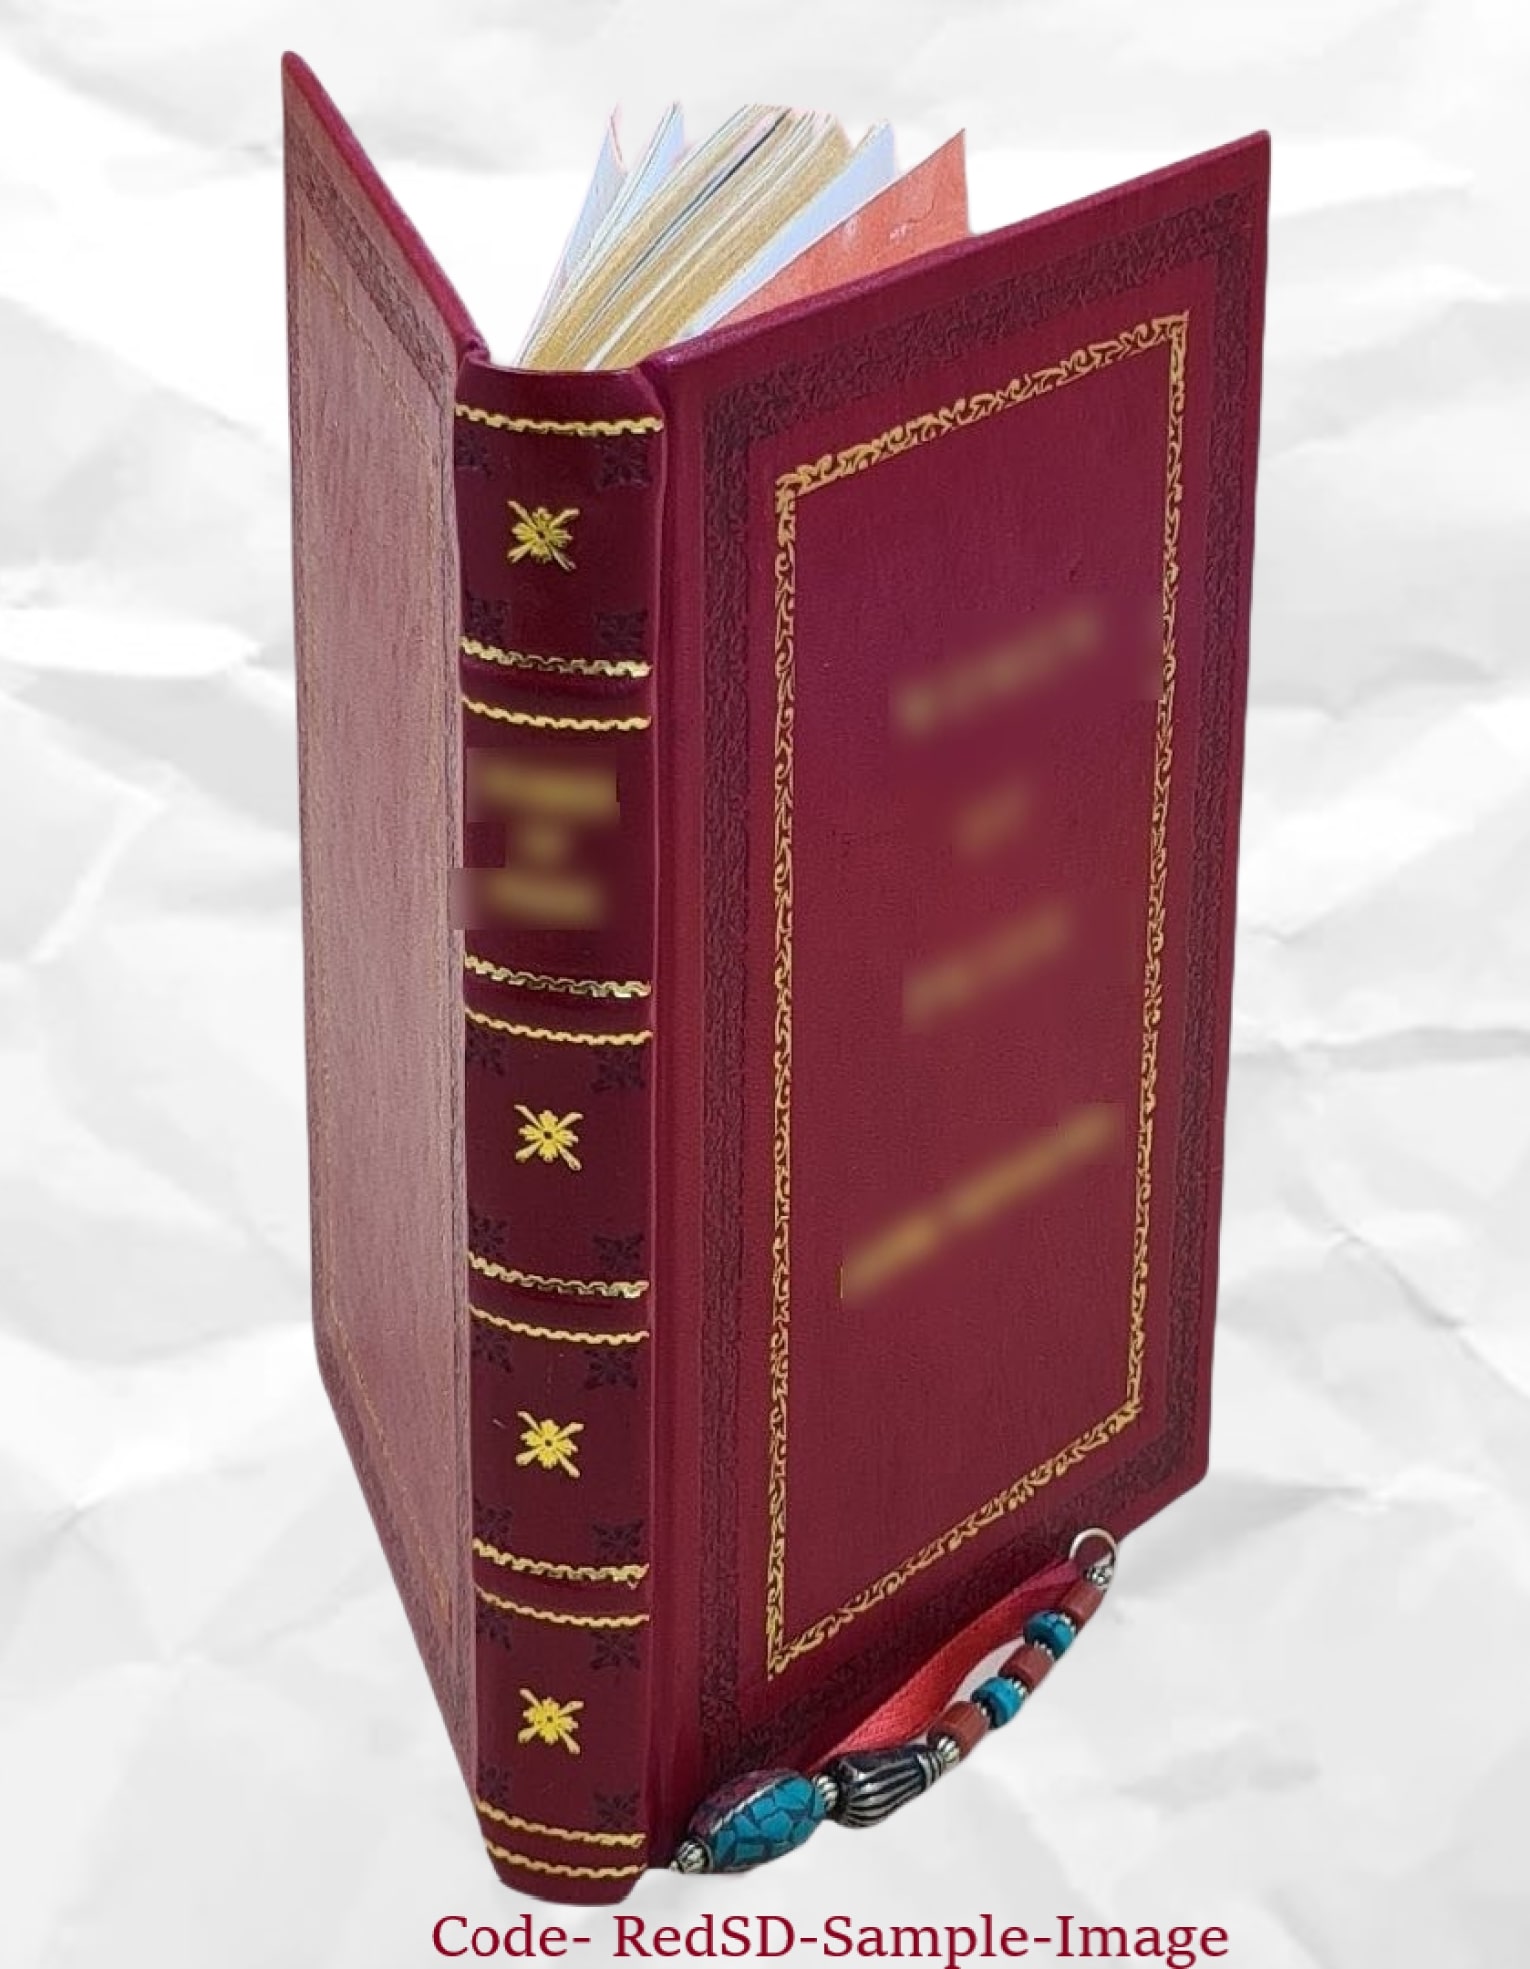 Cuthbert Grant Jr., A Metis Visionary [Premium Leather Bound] by